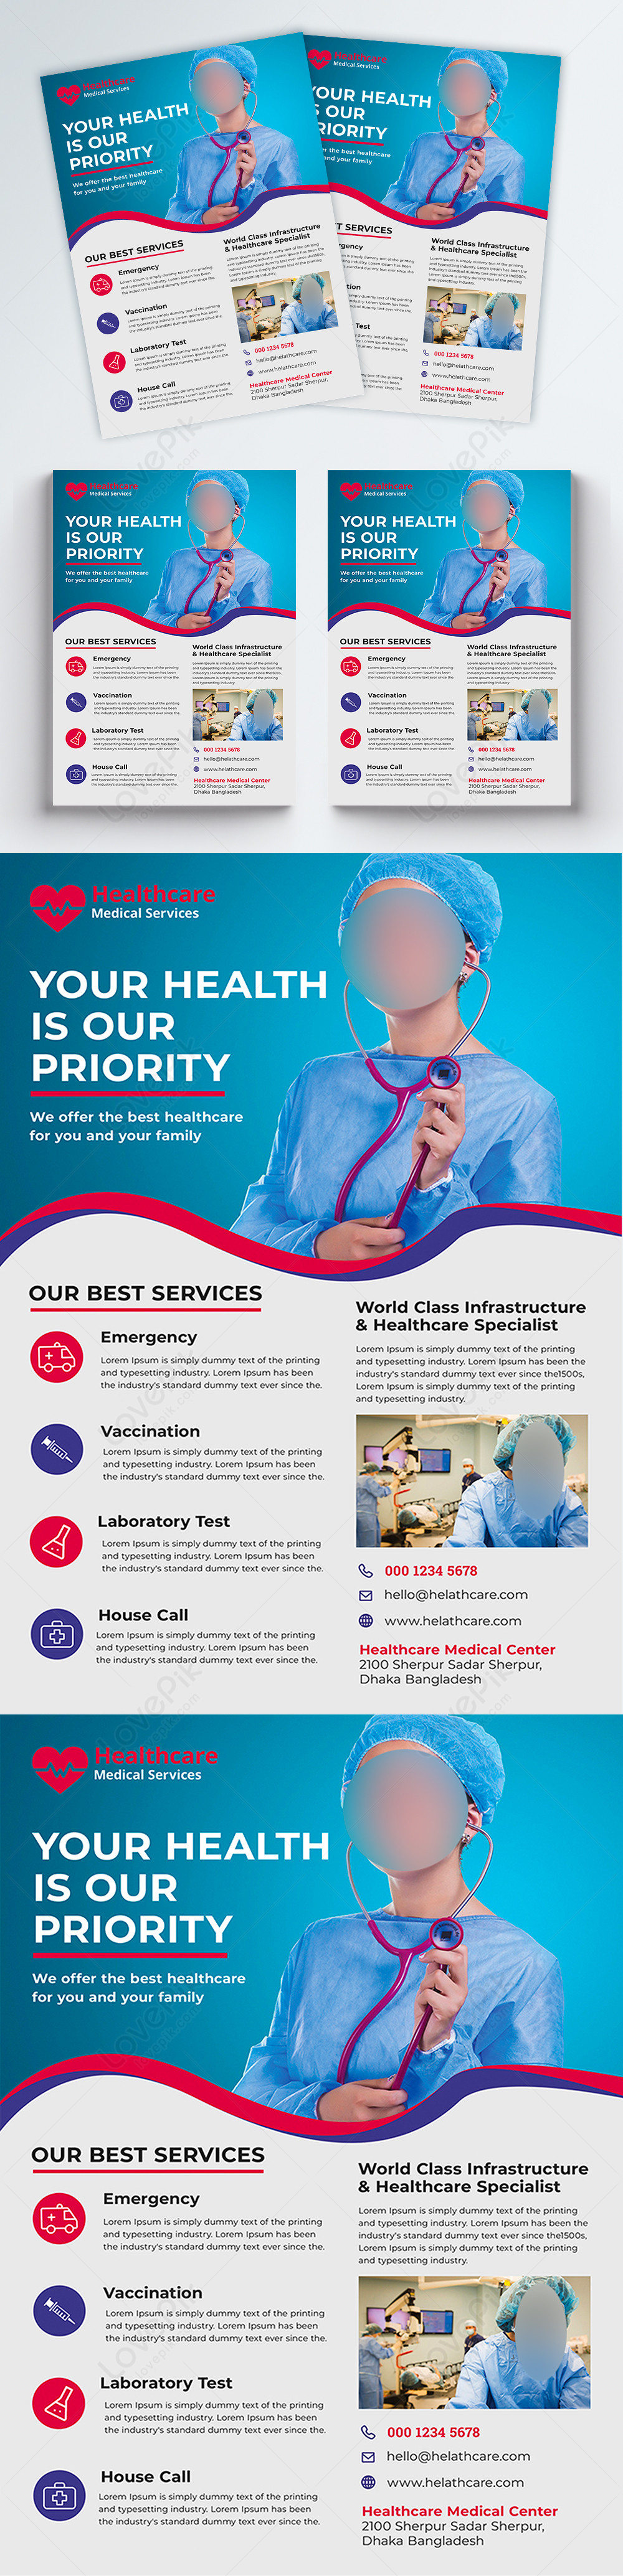 Health Care Flyer Template Free from img.lovepik.com